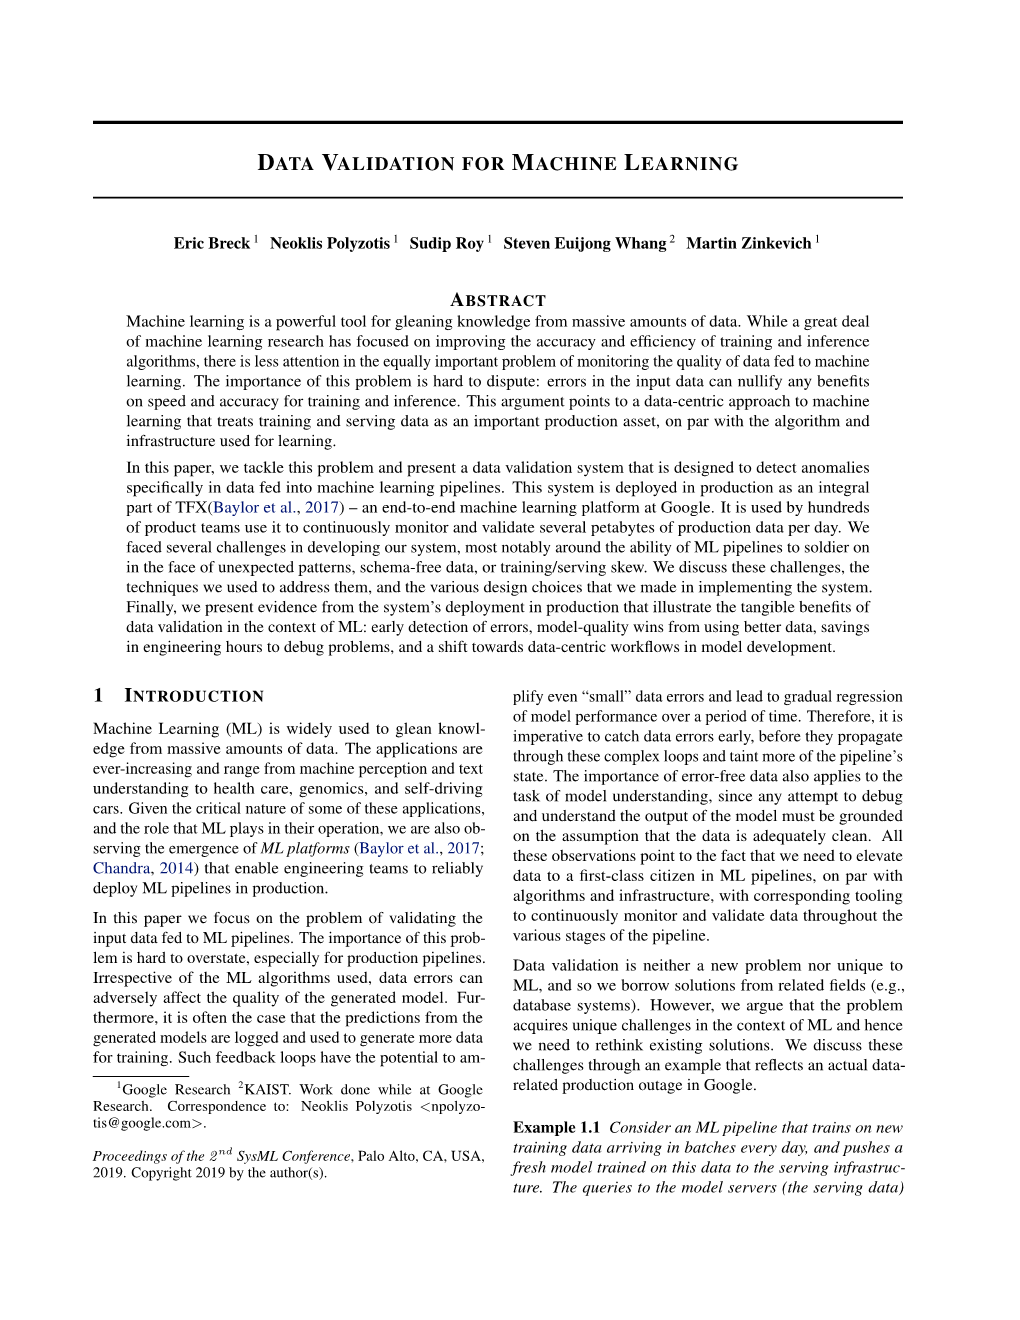 Data Validation for Machine Learning